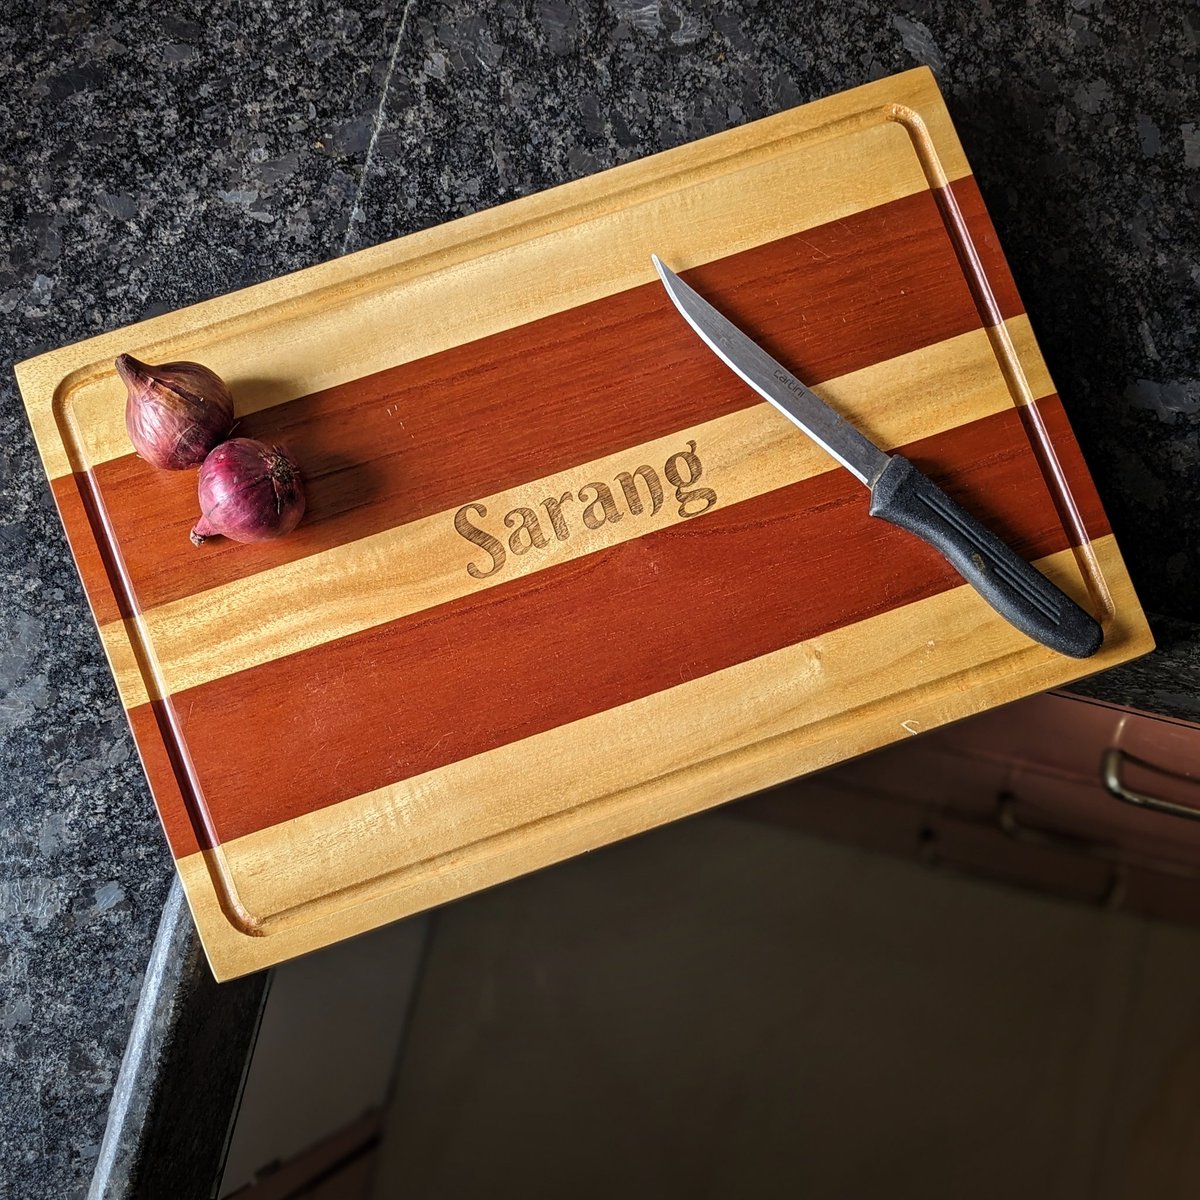 Upgrade your kitchen game with our personalized wooden chopping boards! Not only are these boards sturdy and durable, but you can also add your own custom text to make it truly one-of-a-kind. #kitchengoals #personalizedchoppingboard #woodenwonders #kitchenaccessories #woodgeek